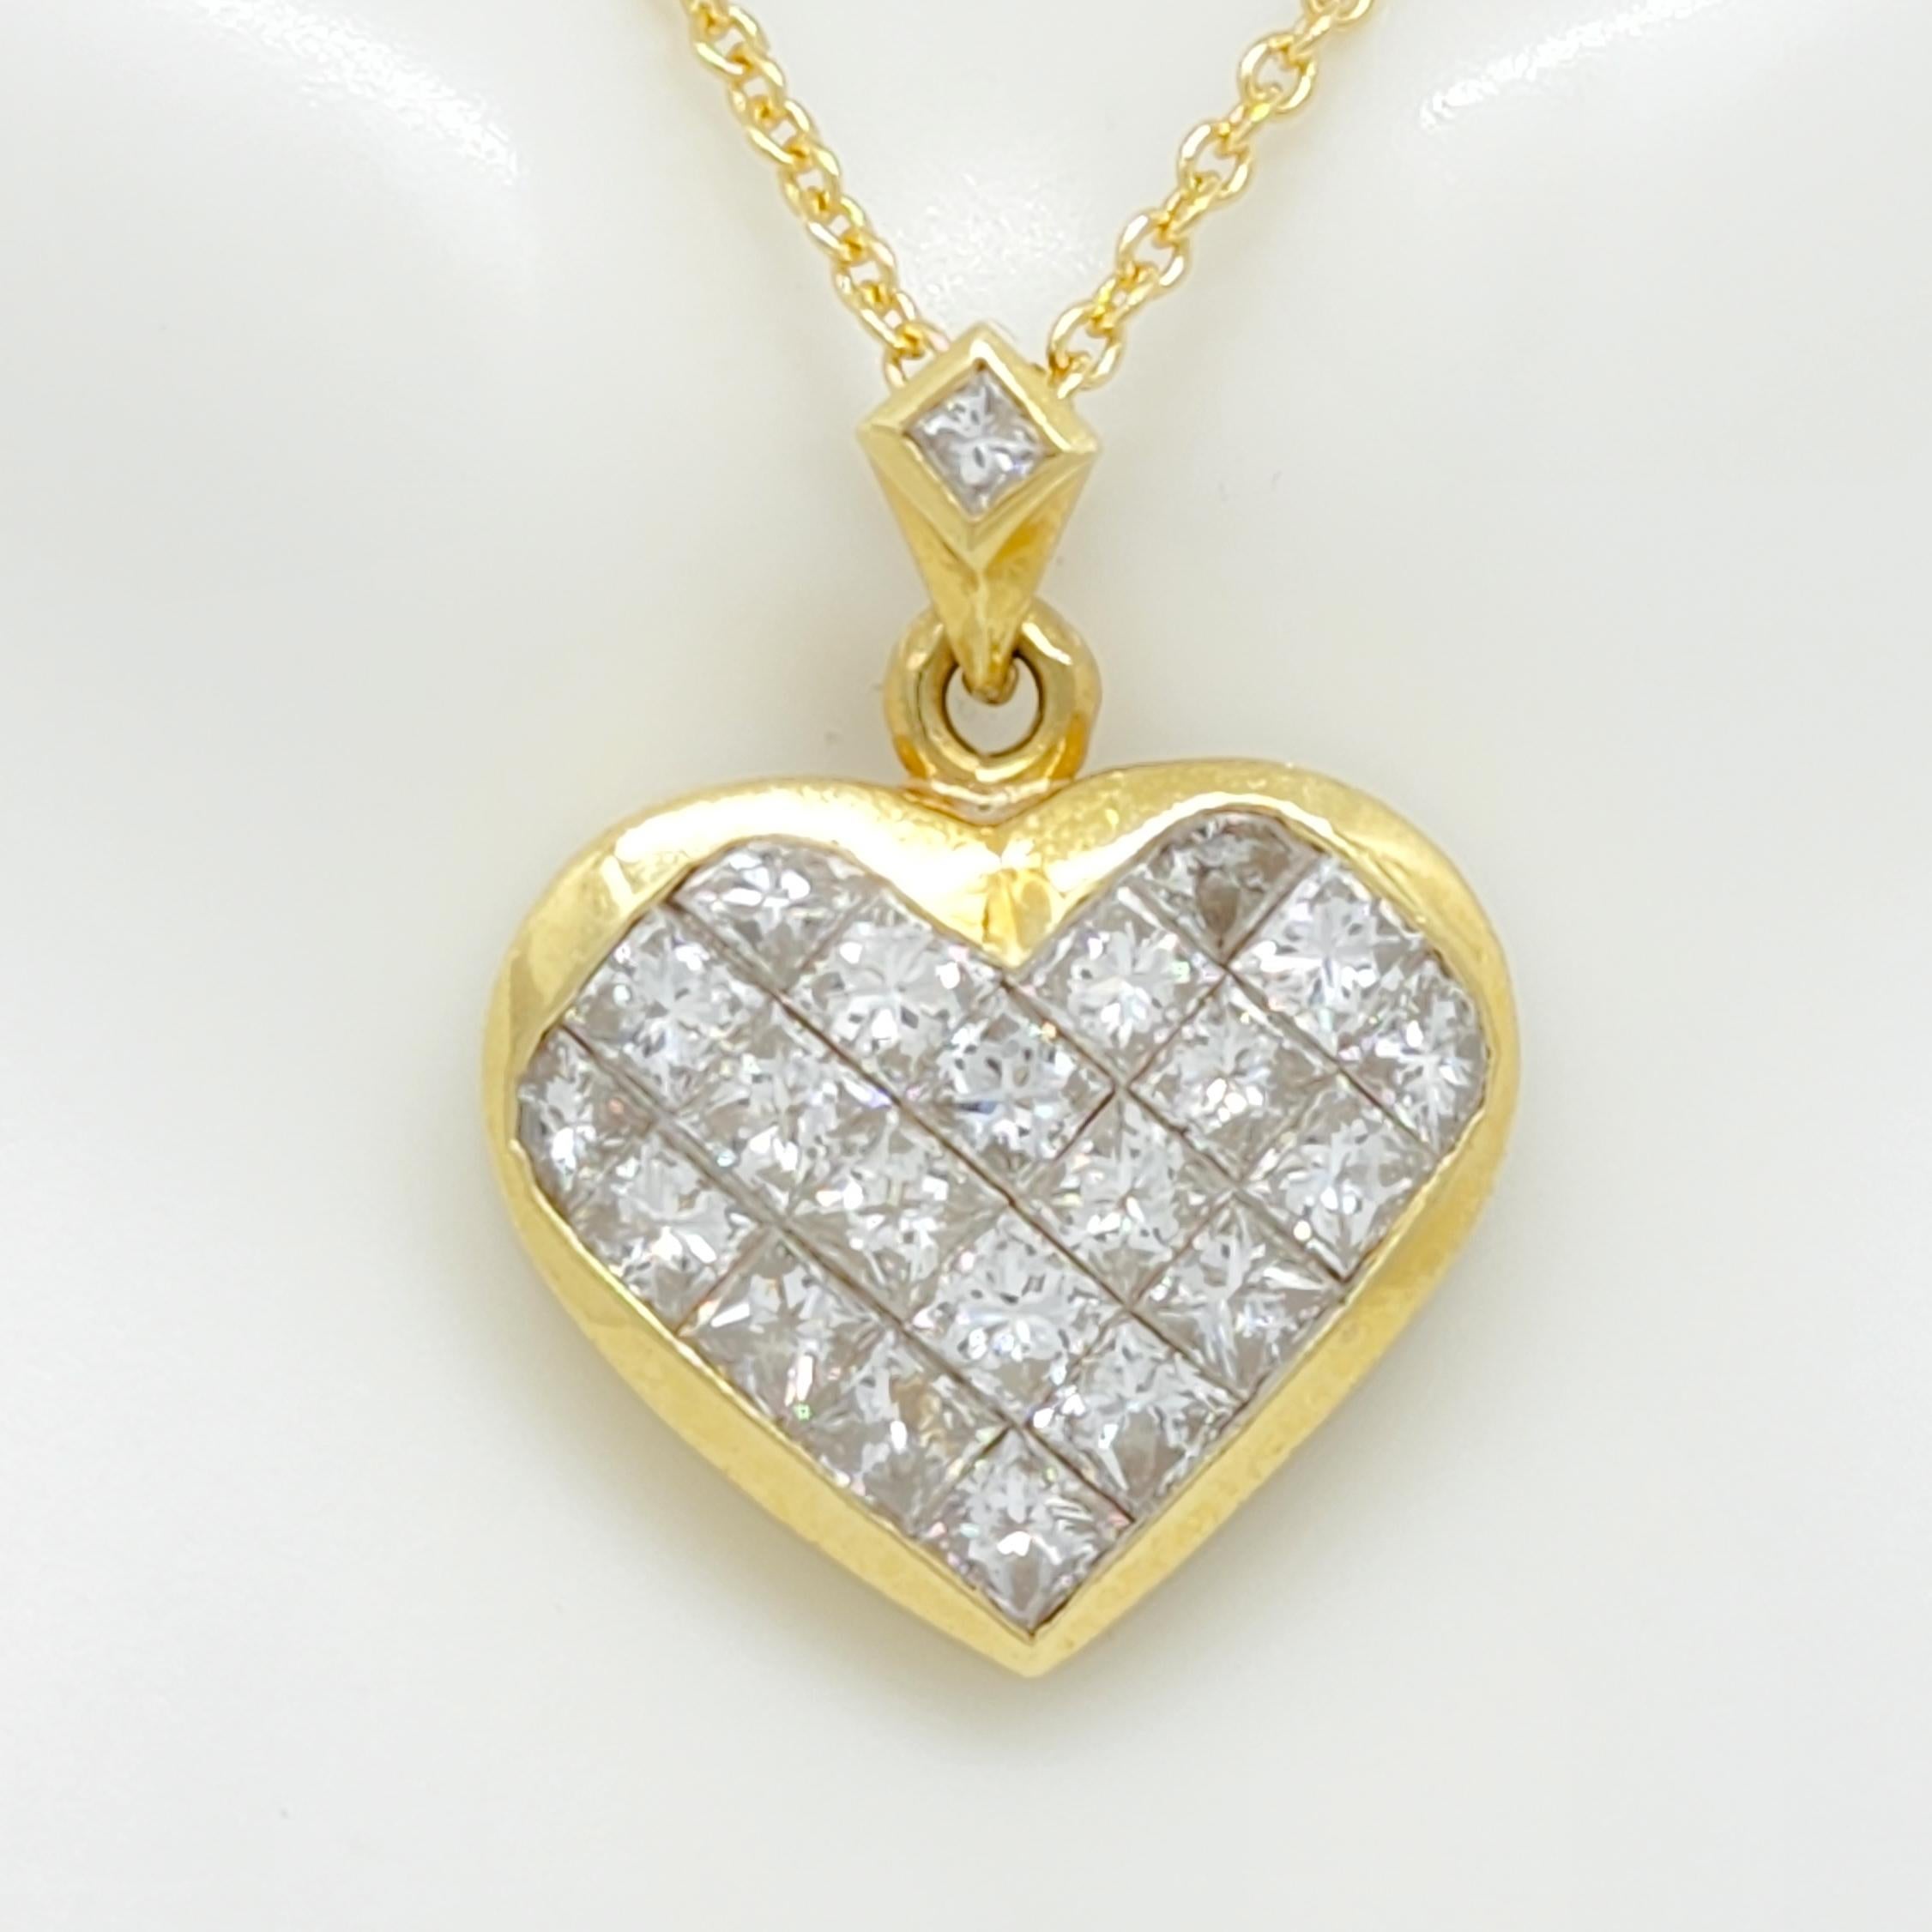 Beautiful 2.75 ct. good quality, white, and bright princess cut diamonds channel set in this heart shape pendant.  There is a single round on the bail also.  Handmade in 18k yellow gold.  Length is 18